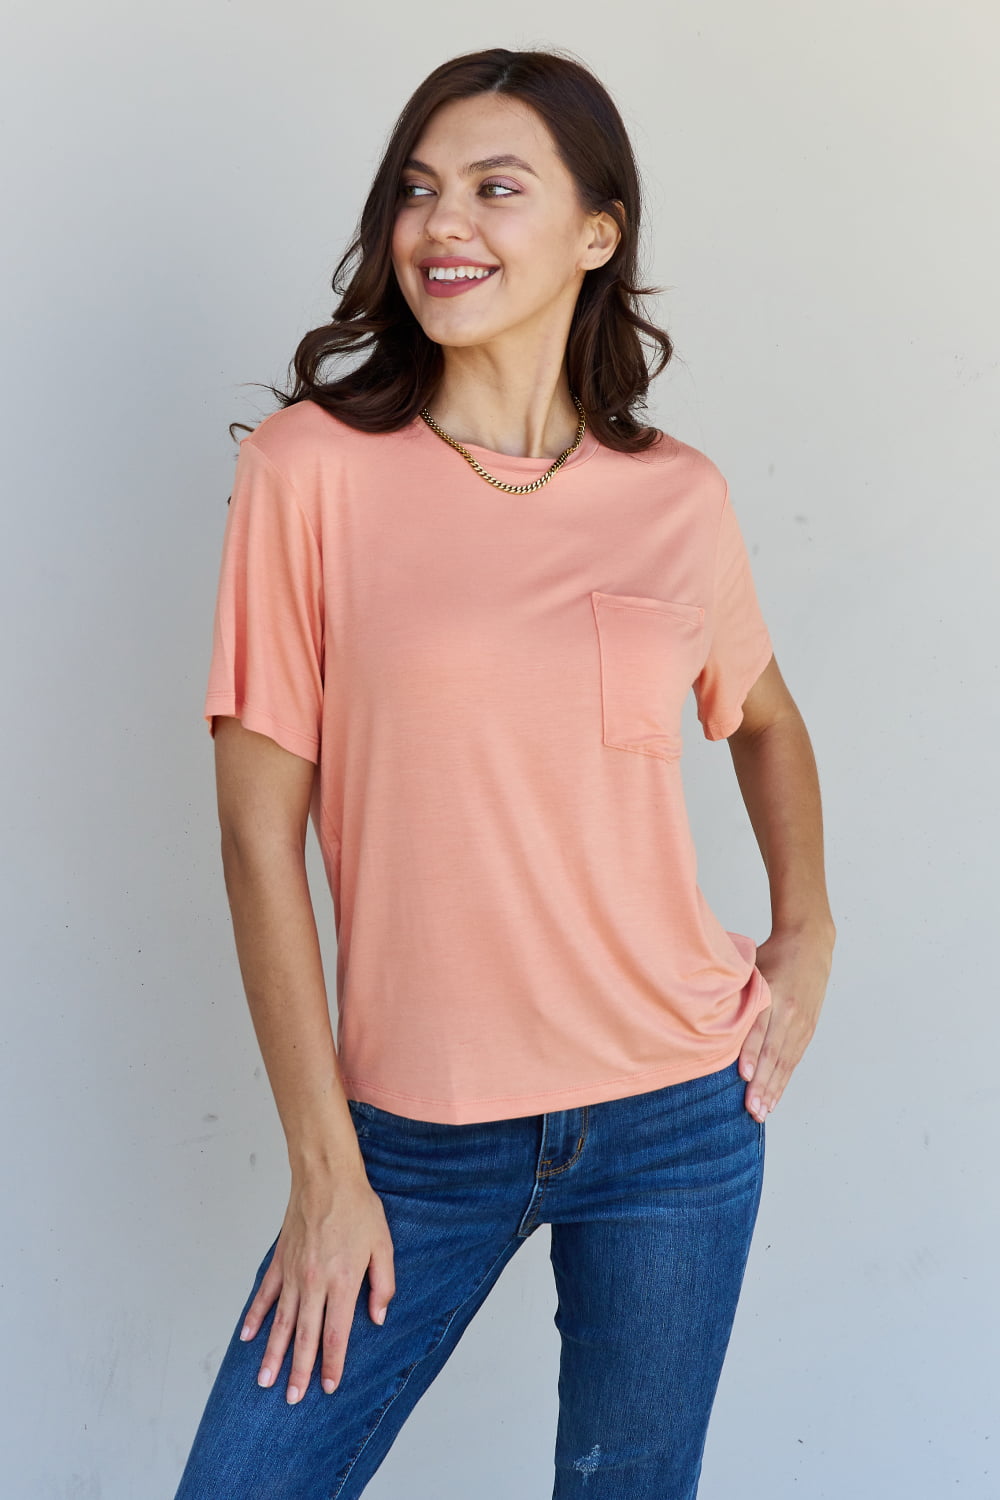 Keep It Simple Oversized Pocket Tee - Cheeky Chic Boutique